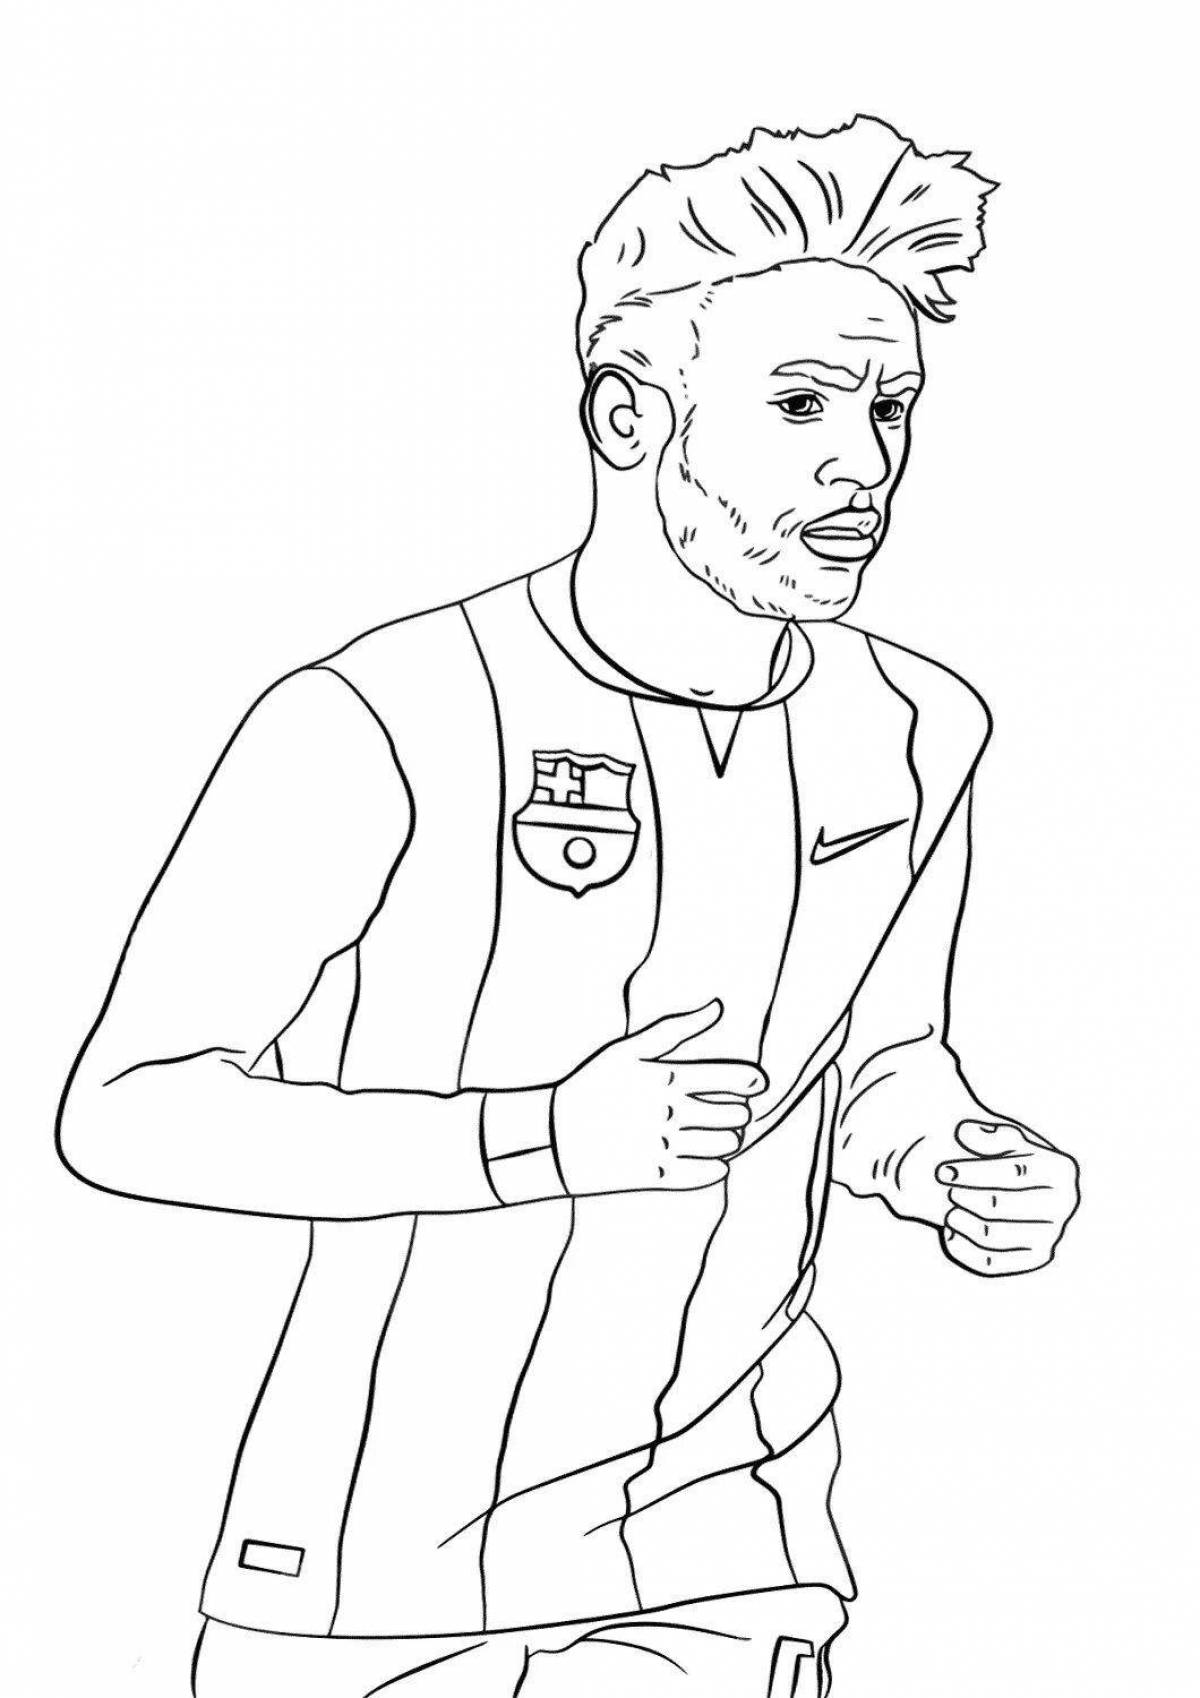 Charming lionel messi coloring book